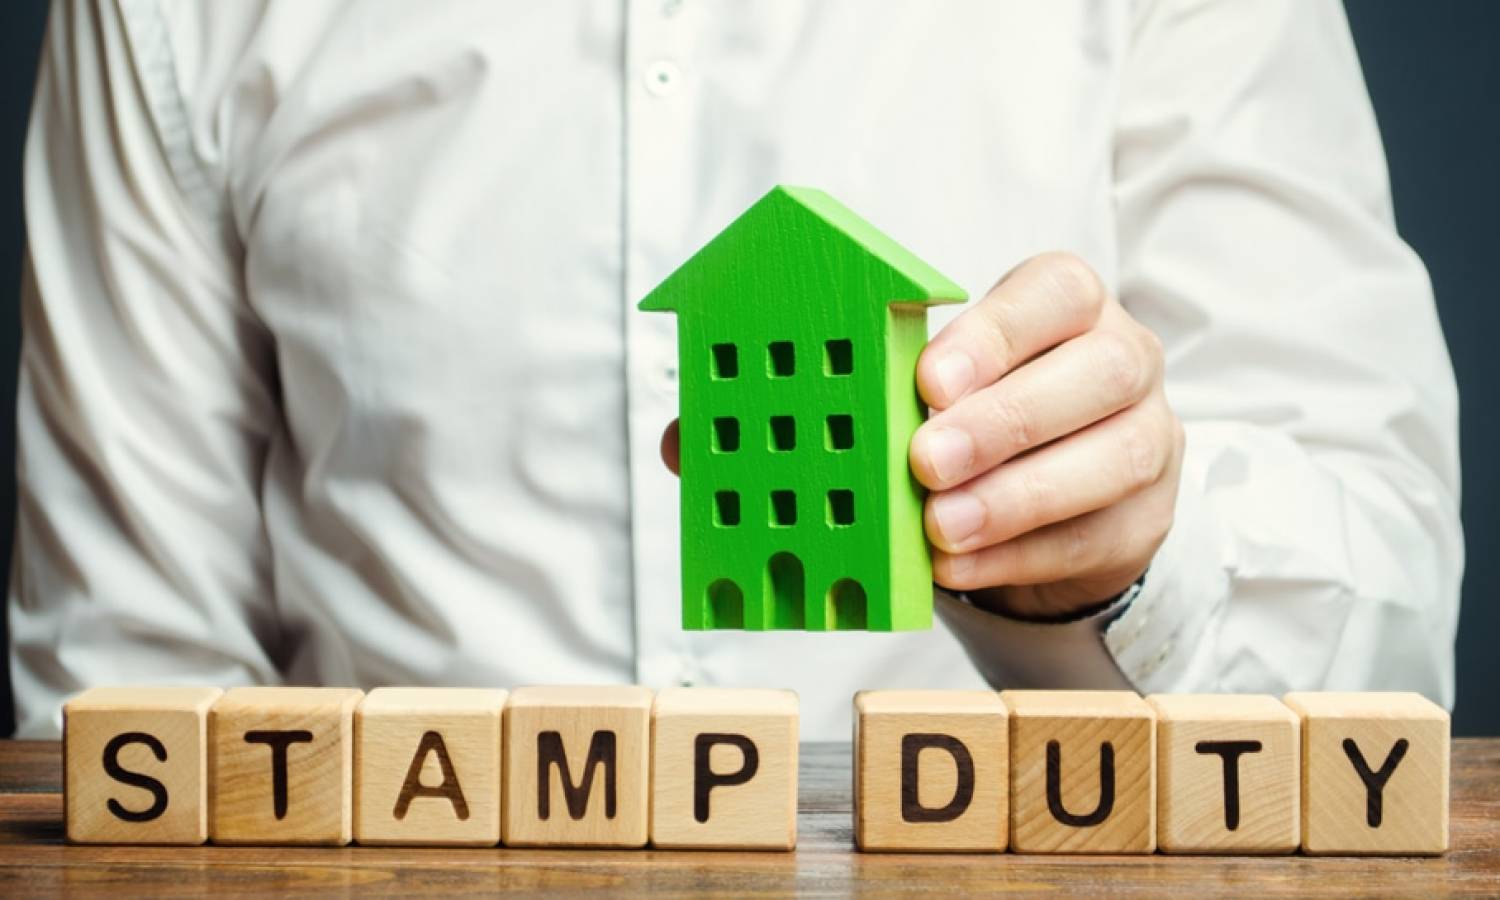 Confusing stamp duty rules led to overpayments